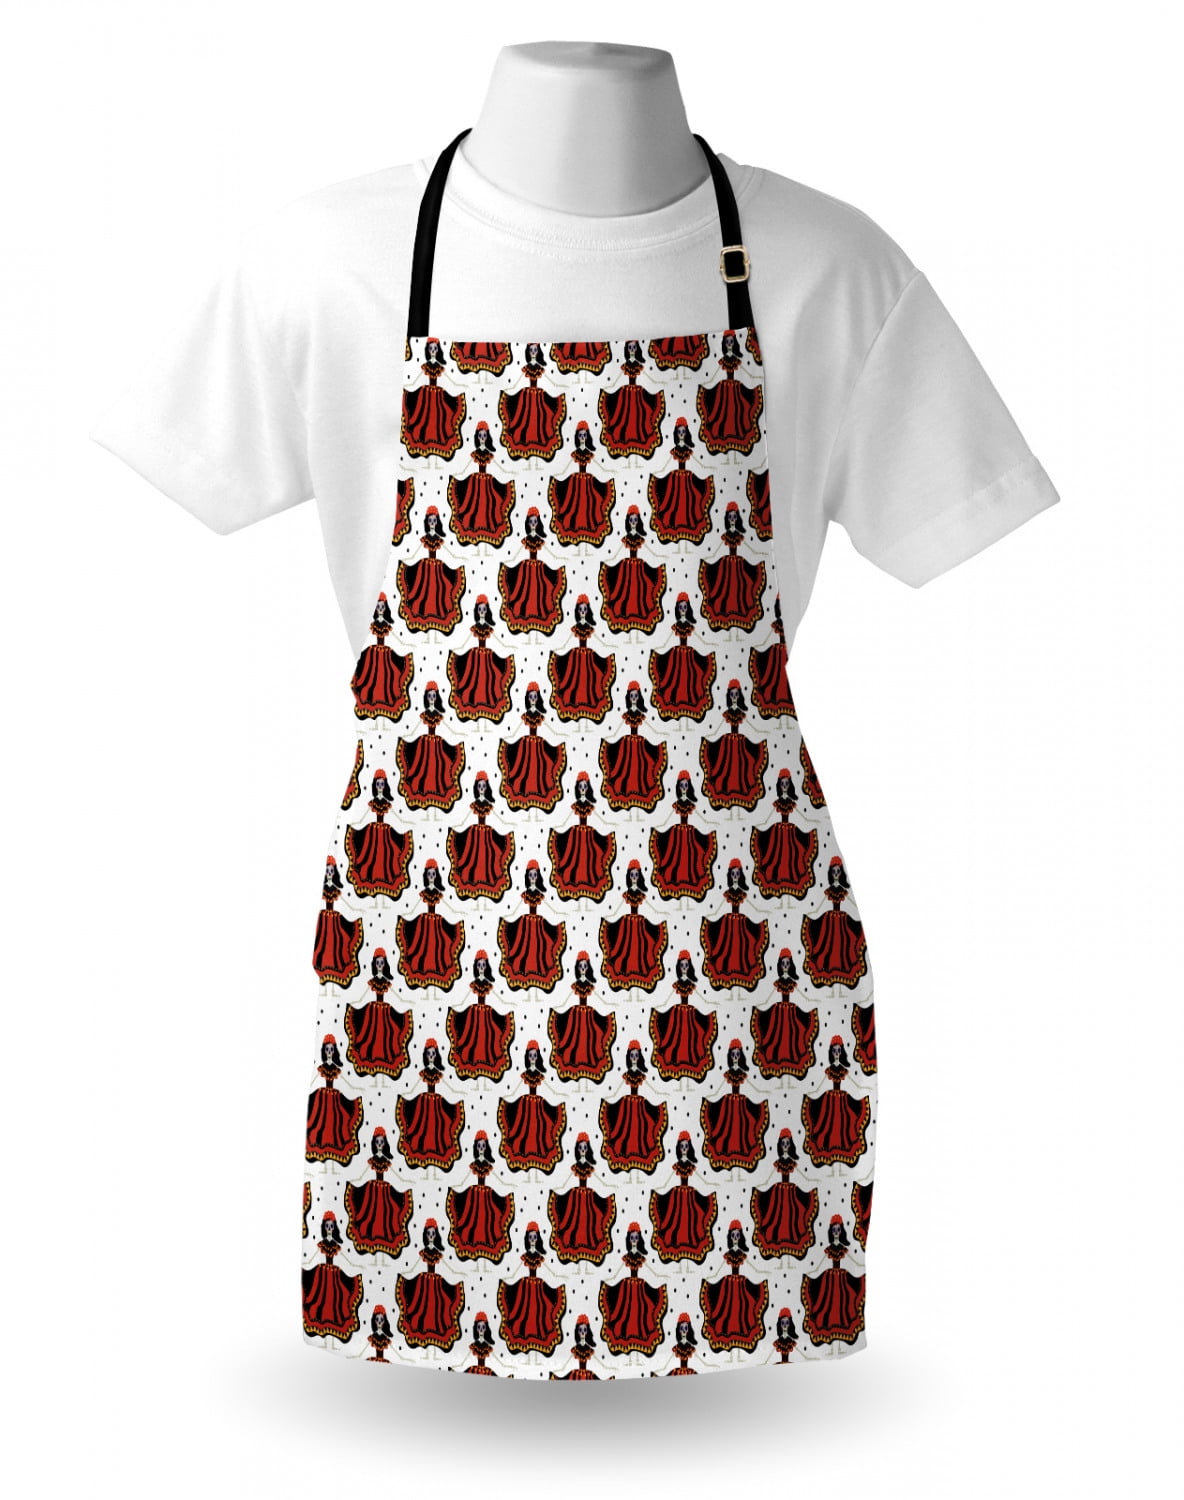 Unisex Kitchen Bib with Adjustable Neck for Cooking Gardening Adult Size Catrina Calavera Featured Ornaments Macabre Remember The Dead Theme White Ivory Ambesonne Sugar Skull Apron 